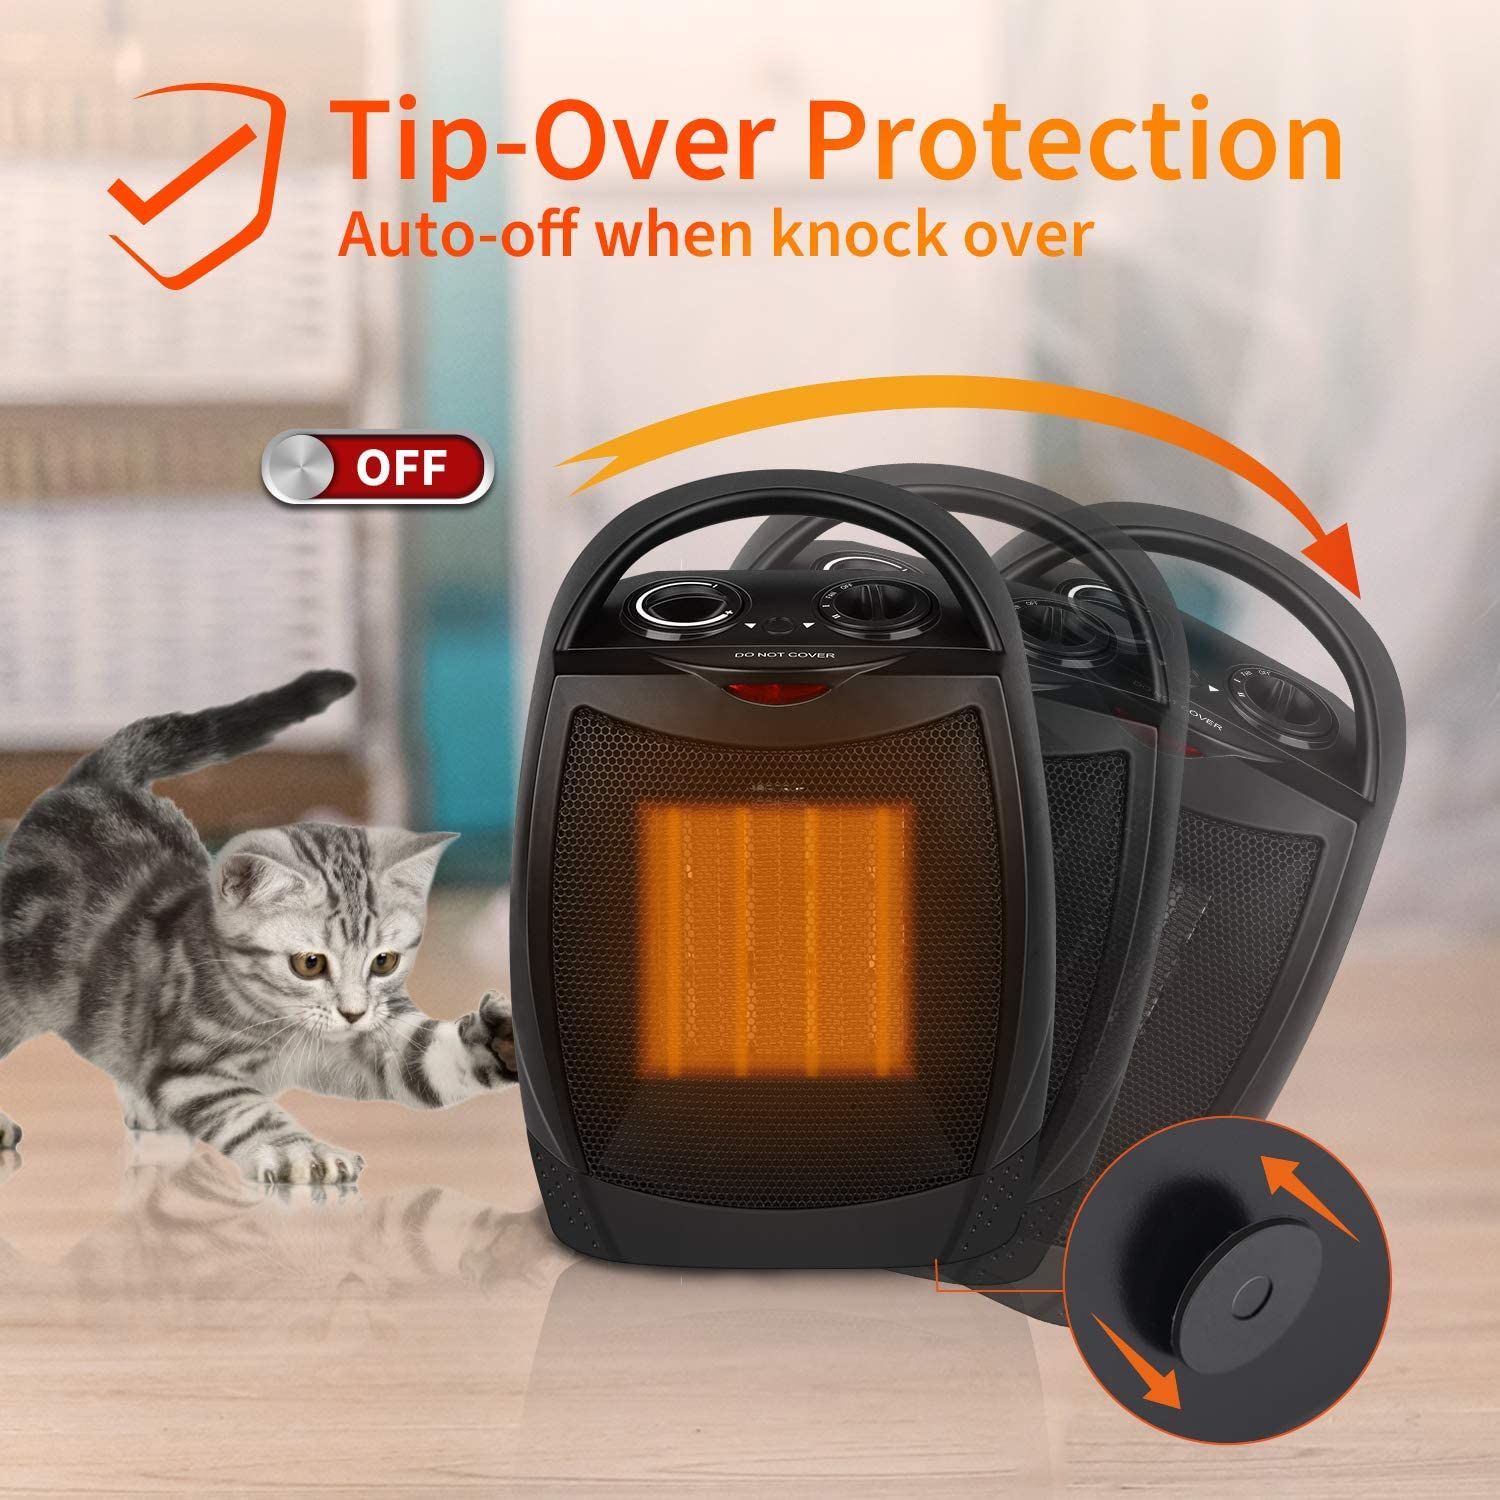 GiveBest Portable Electric Space Heater Design 4